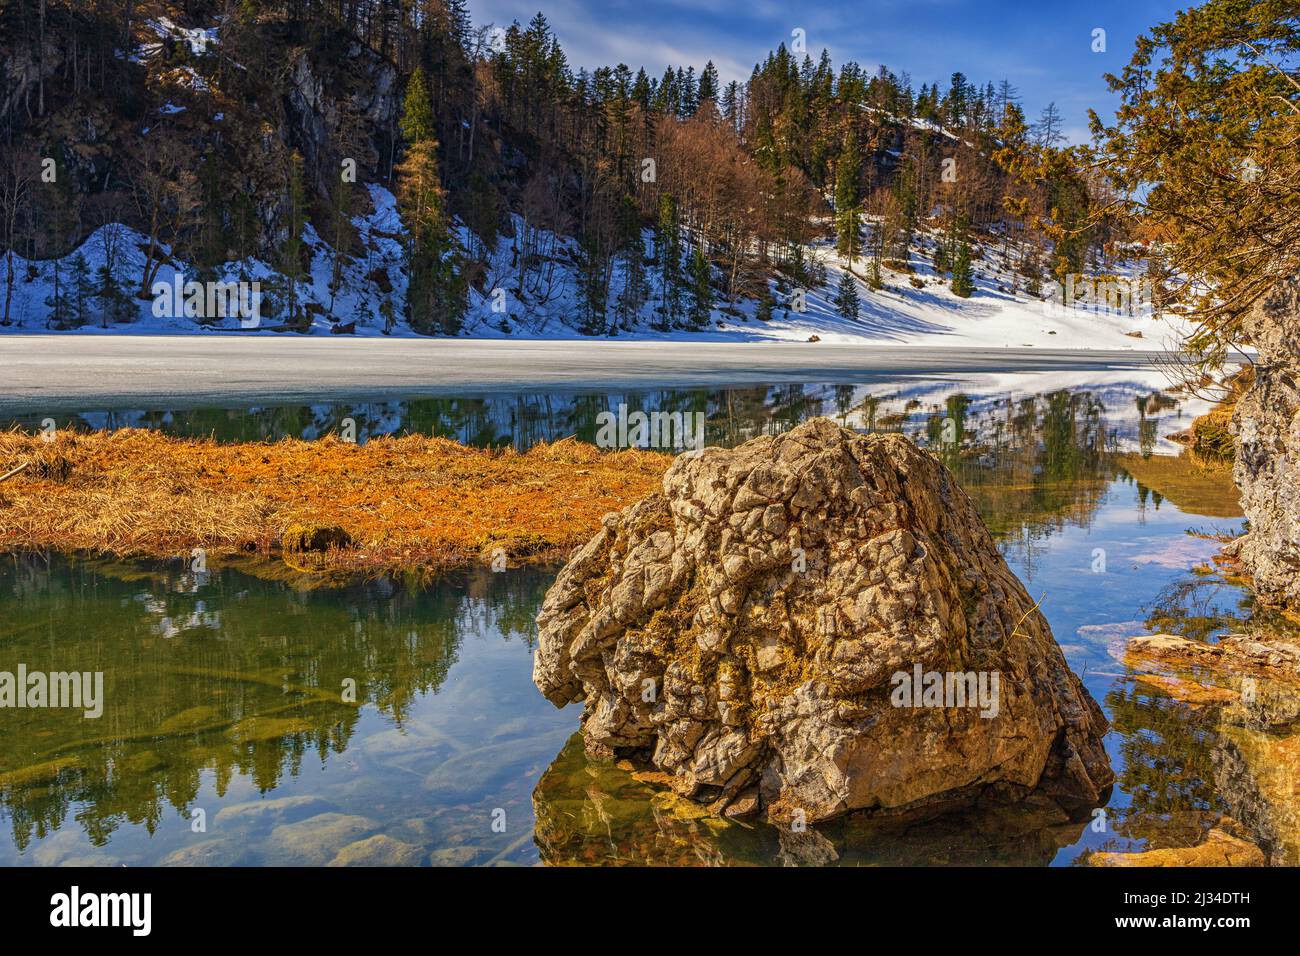 Taubensee with ice cover, Stein in the foreground, Reit im Winkl, Upper Bavaria, Bavaria, Germany Stock Photo